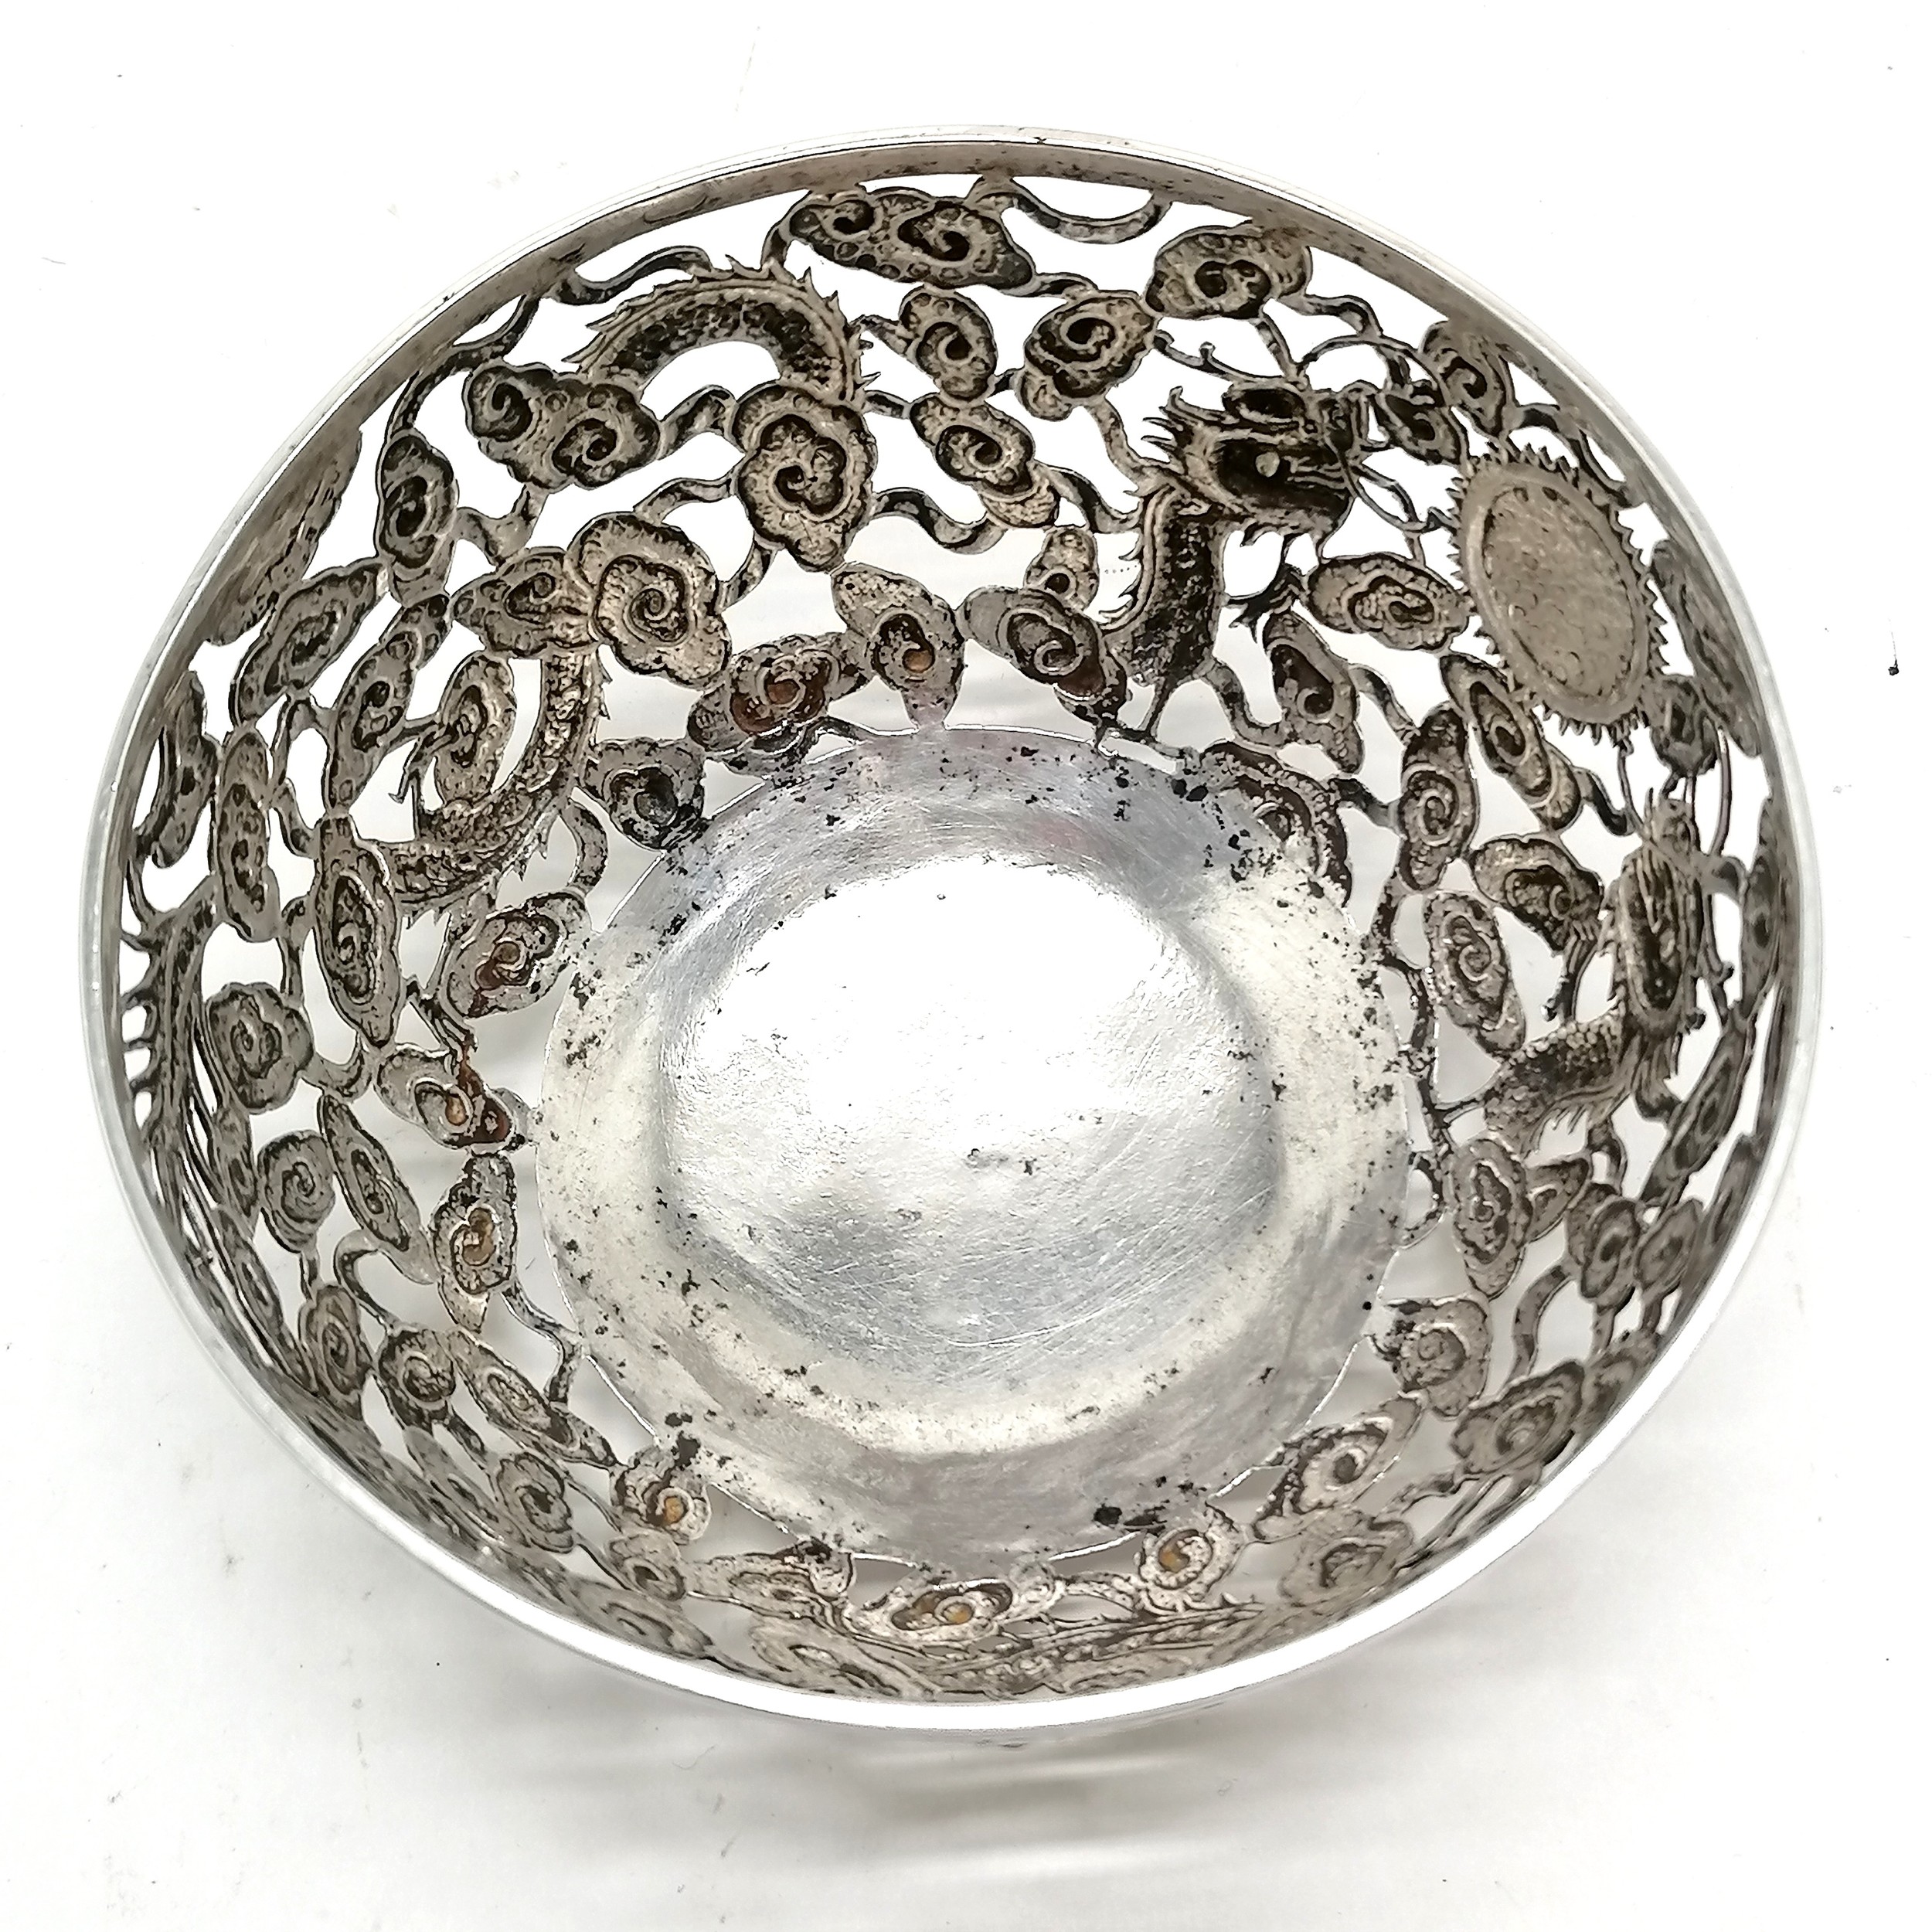 Chinese antique silver bowl with pierced decoration depicting 2 dragons & flaming pearl cartouche by - Image 4 of 6